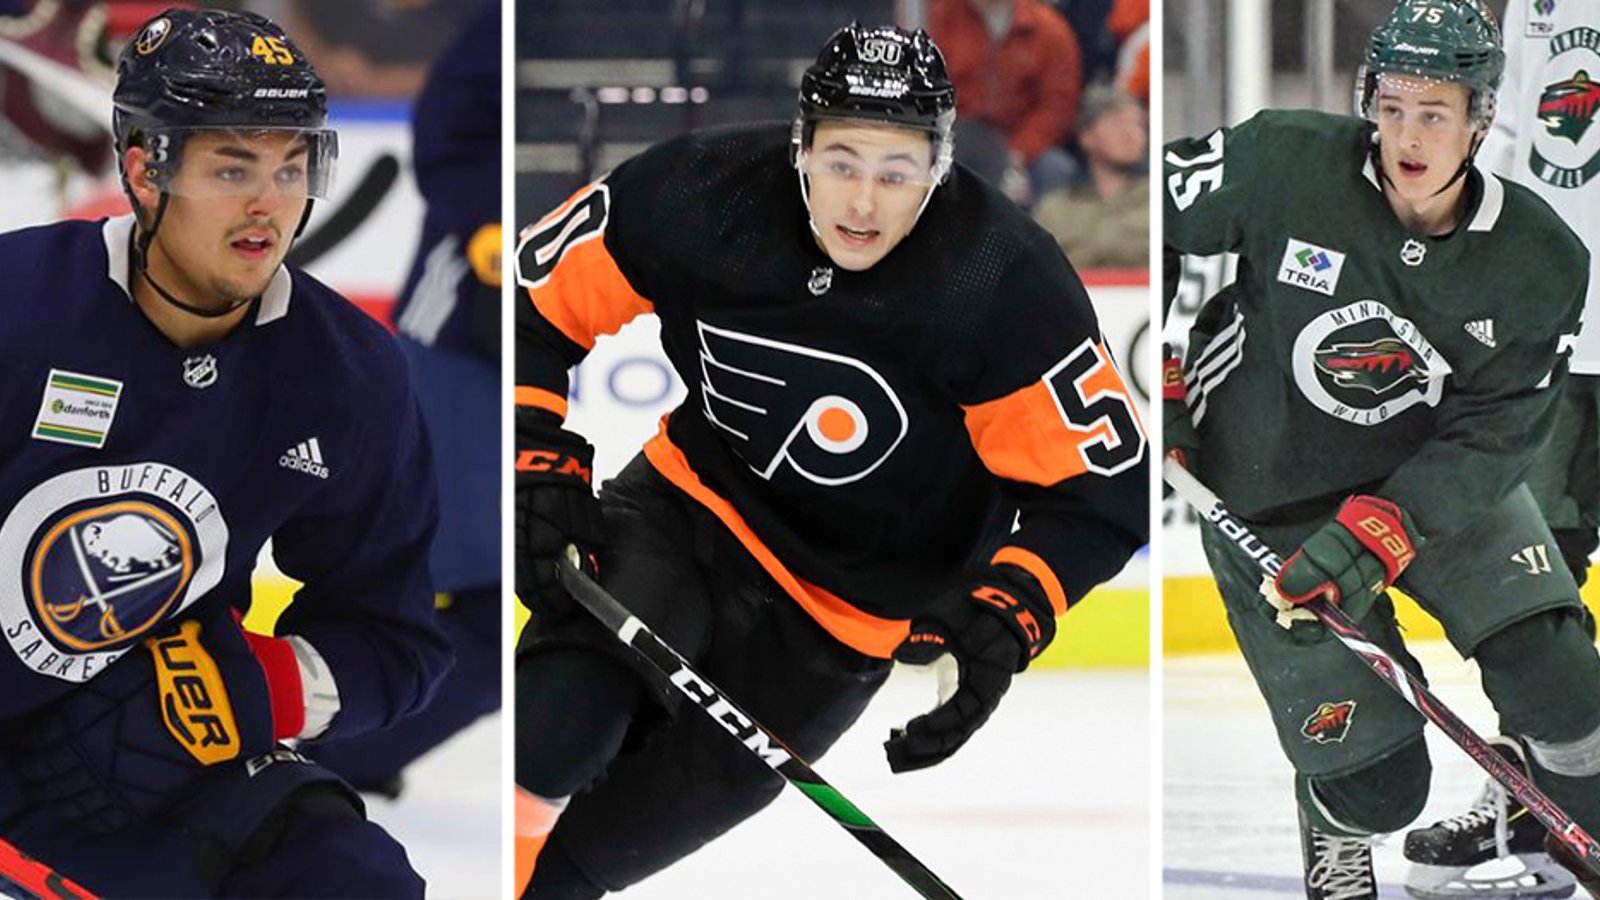 Sabres, Flyers and Wild all make minor contract signings